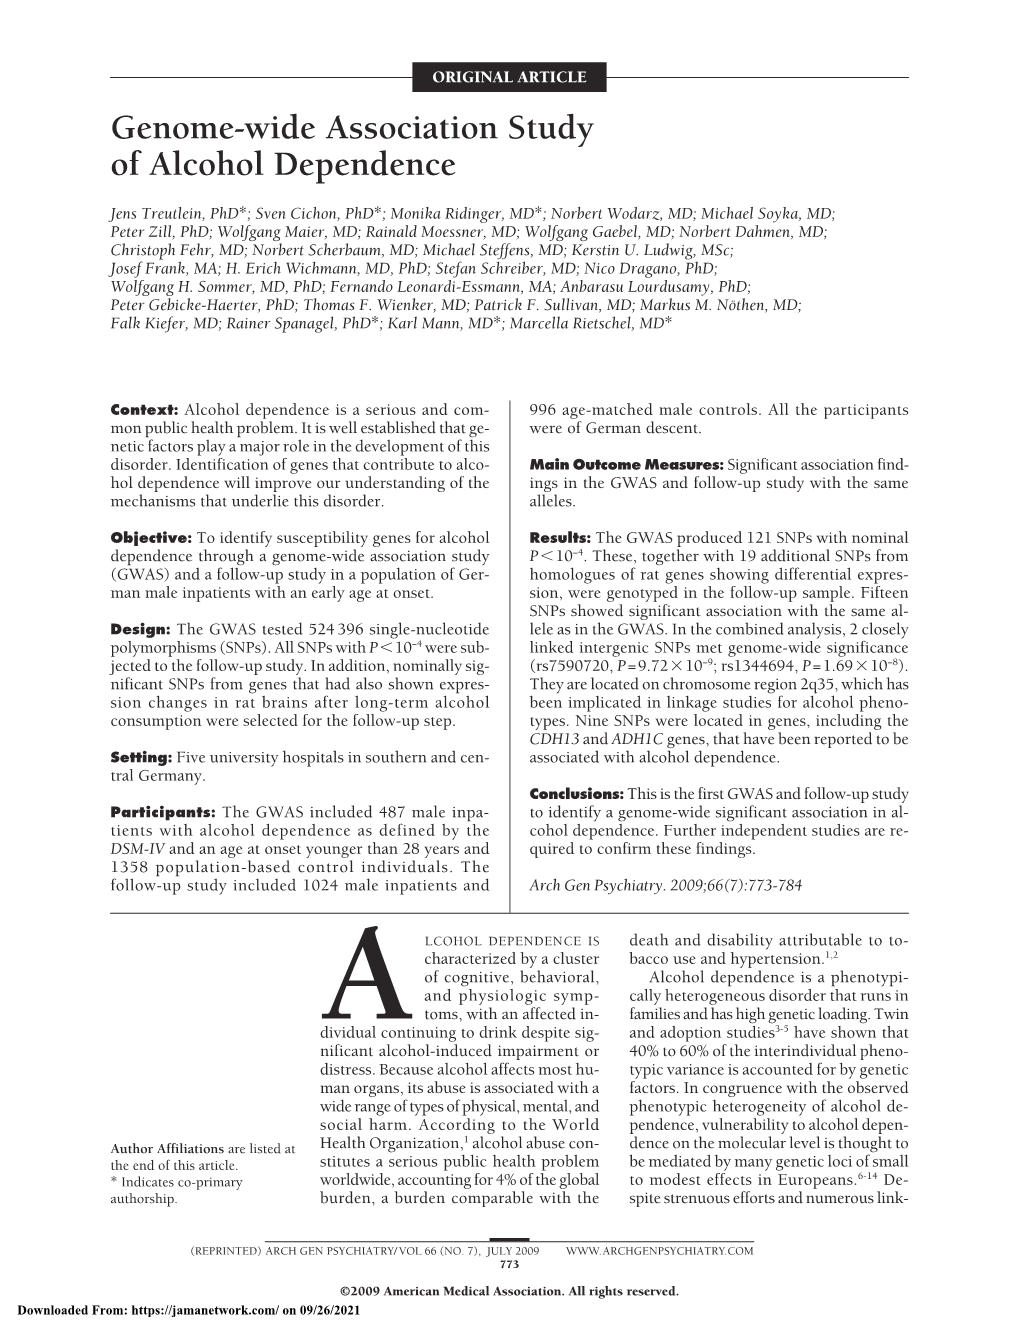 Genome-Wide Association Study of Alcohol Dependence